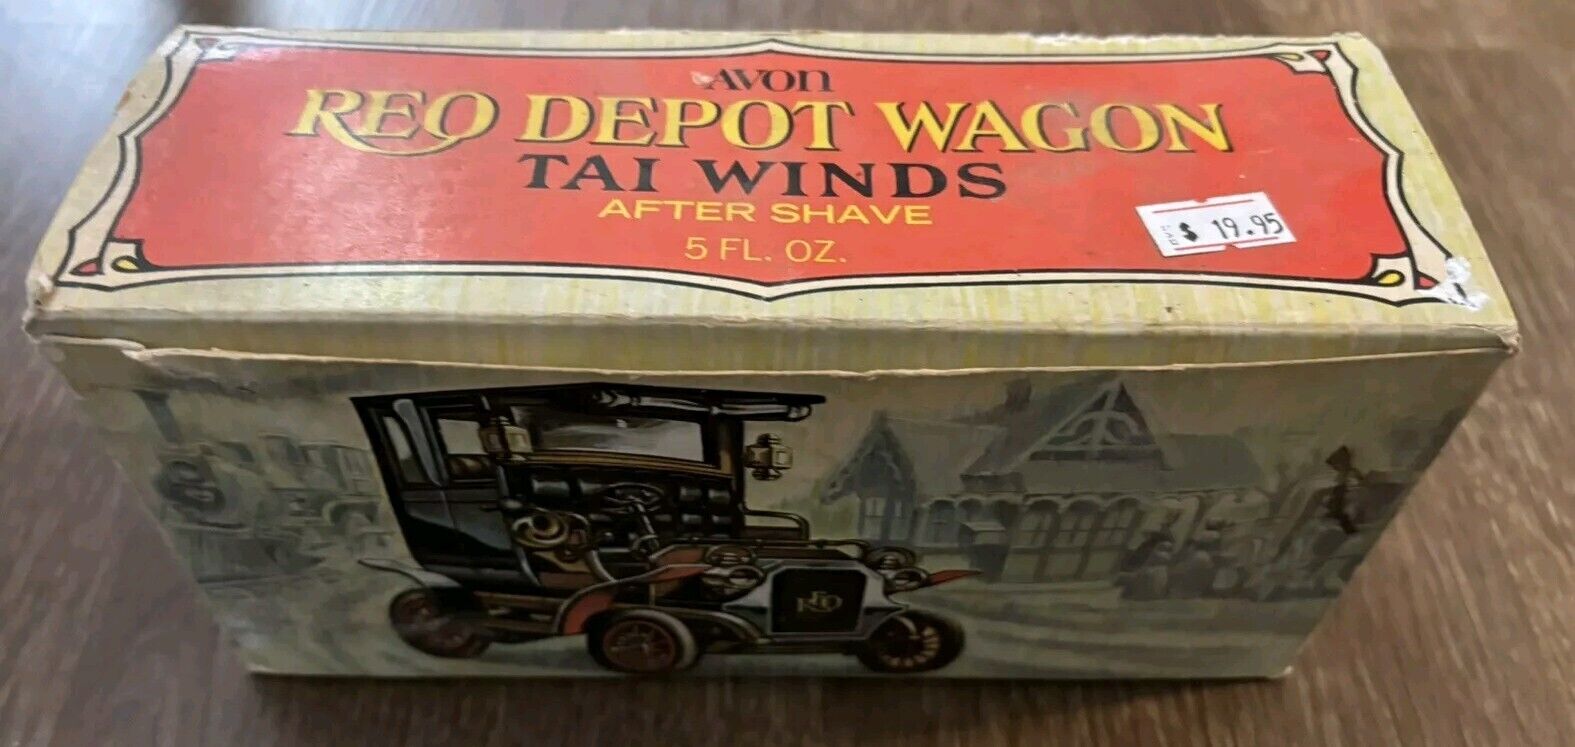 Vintage Avon Tai Winds After Shave Red Depot Wagon Glass Bottle Decanter NOS